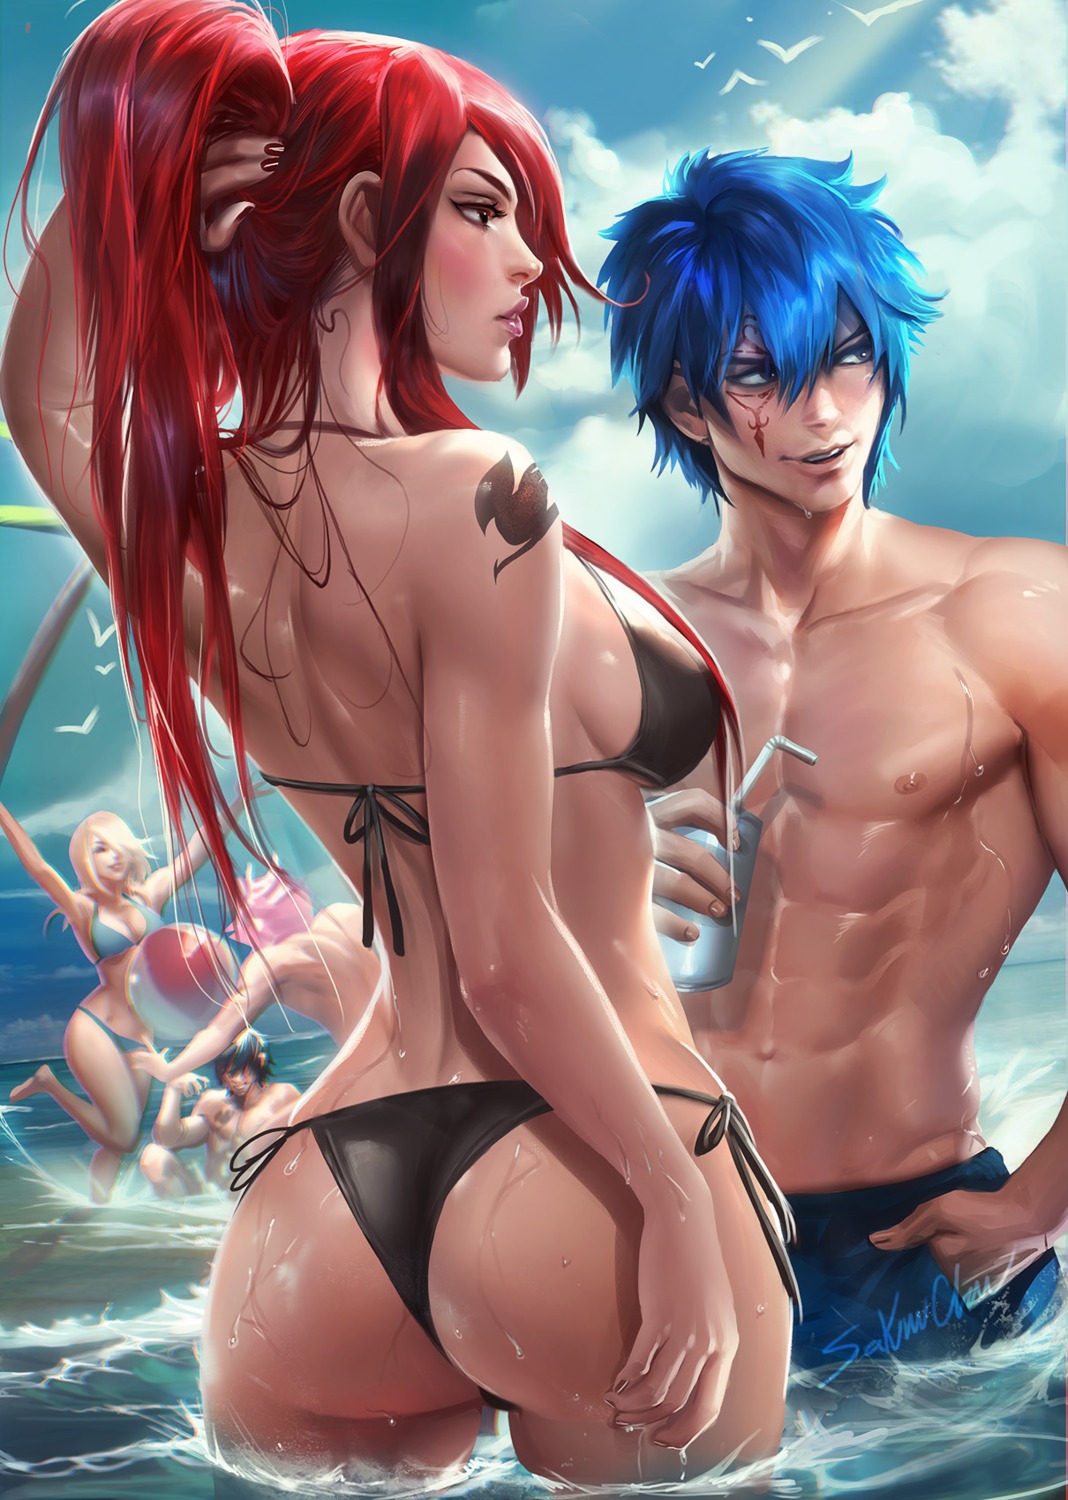 ass bikini cleavage erza_scarlet fairy_tail gray_fullbuster jellal_fernandes lucy_heartfilia natsu_dragneel sakimichan swimsuits tattoo thighhighs wet